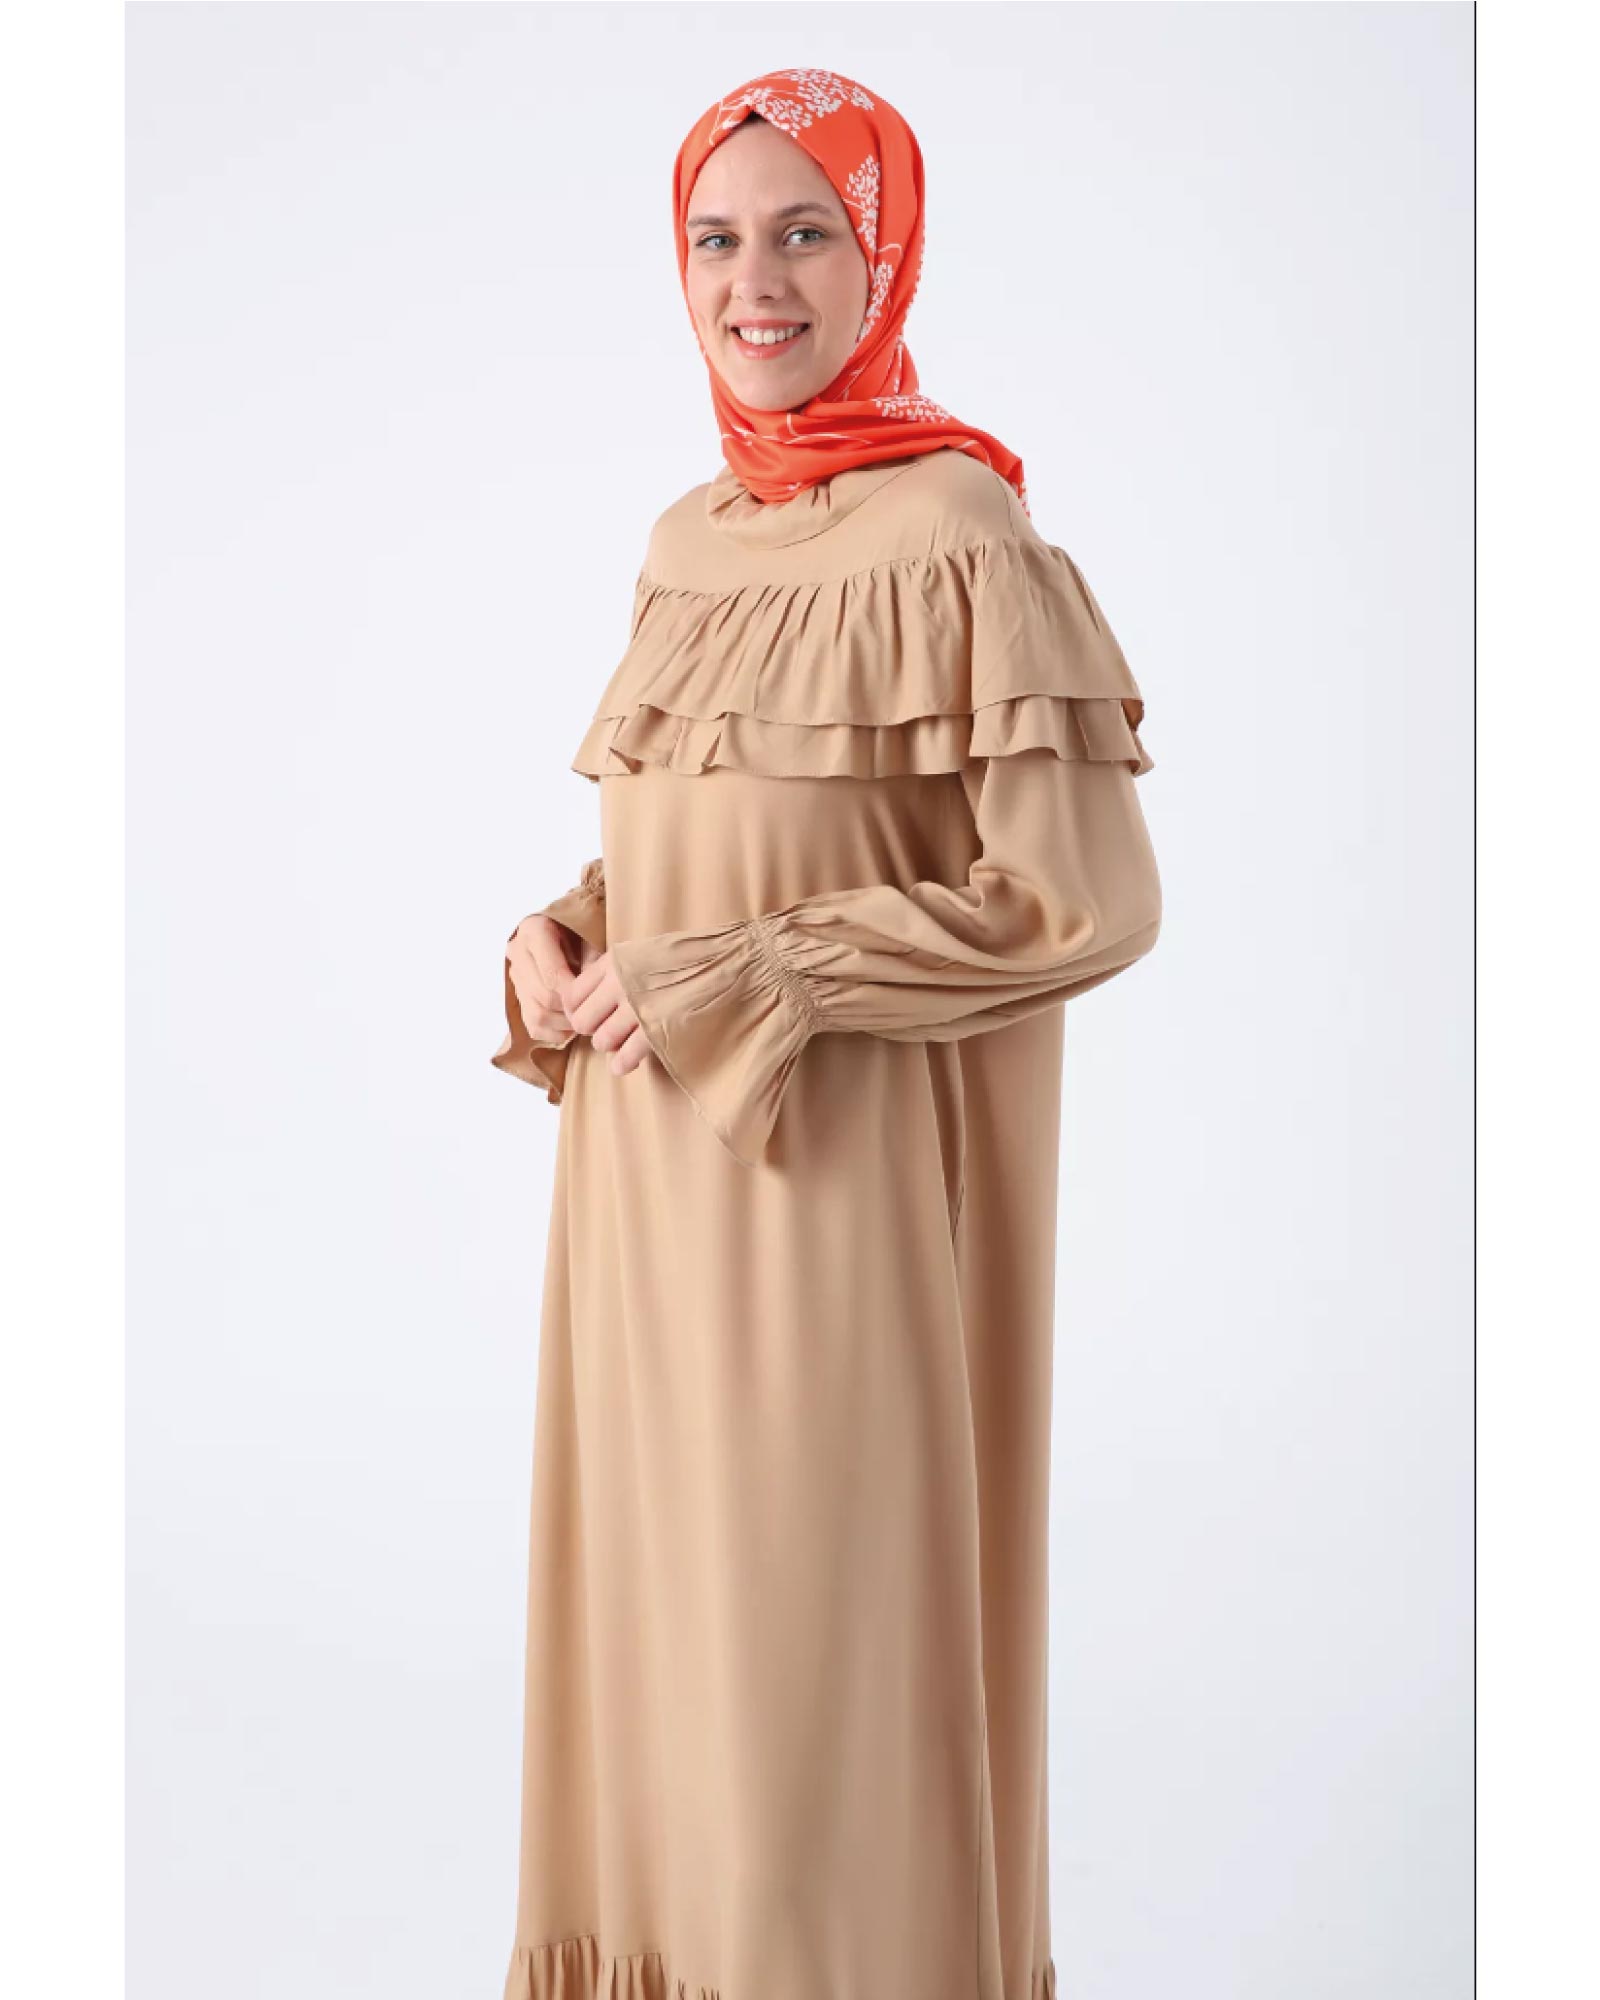 Hijab dress with ruffles on the shoulders and sleeves